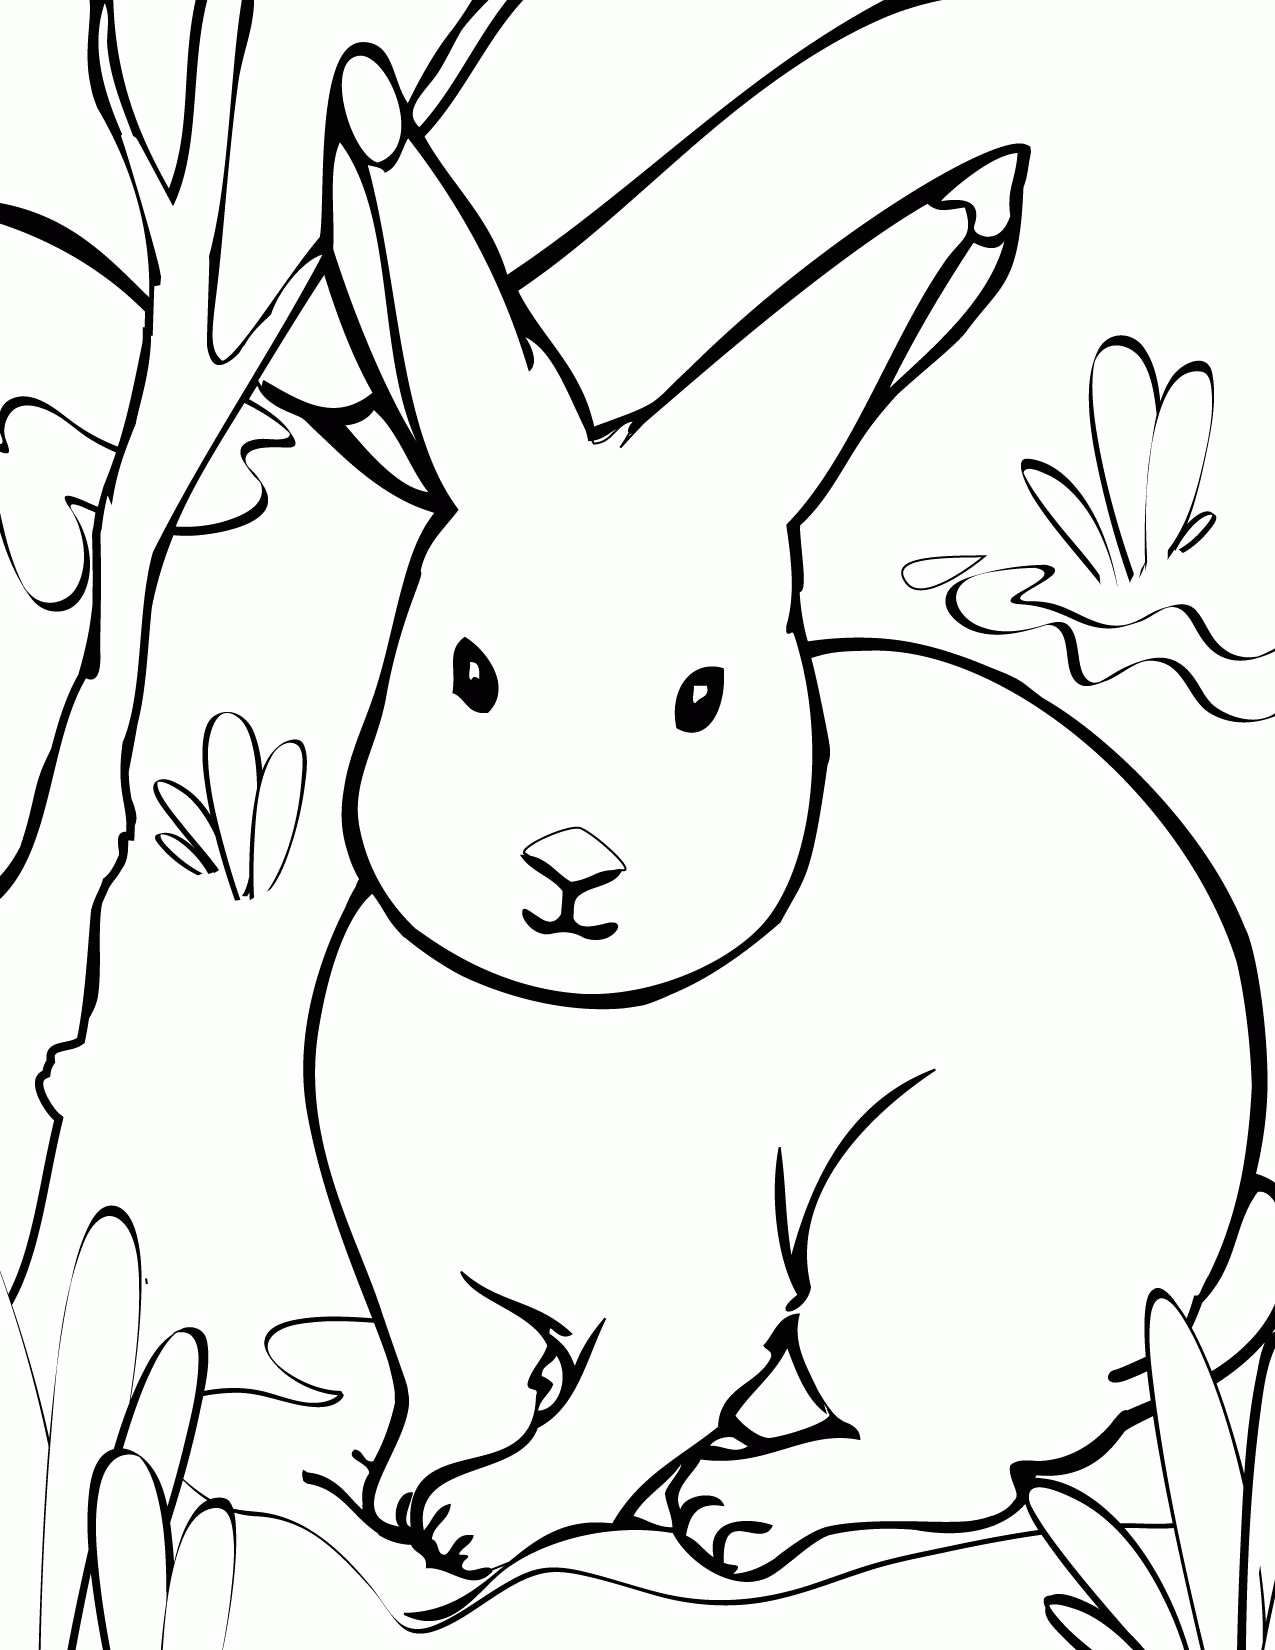 Arctic Animals Coloring Pages - Handipoints